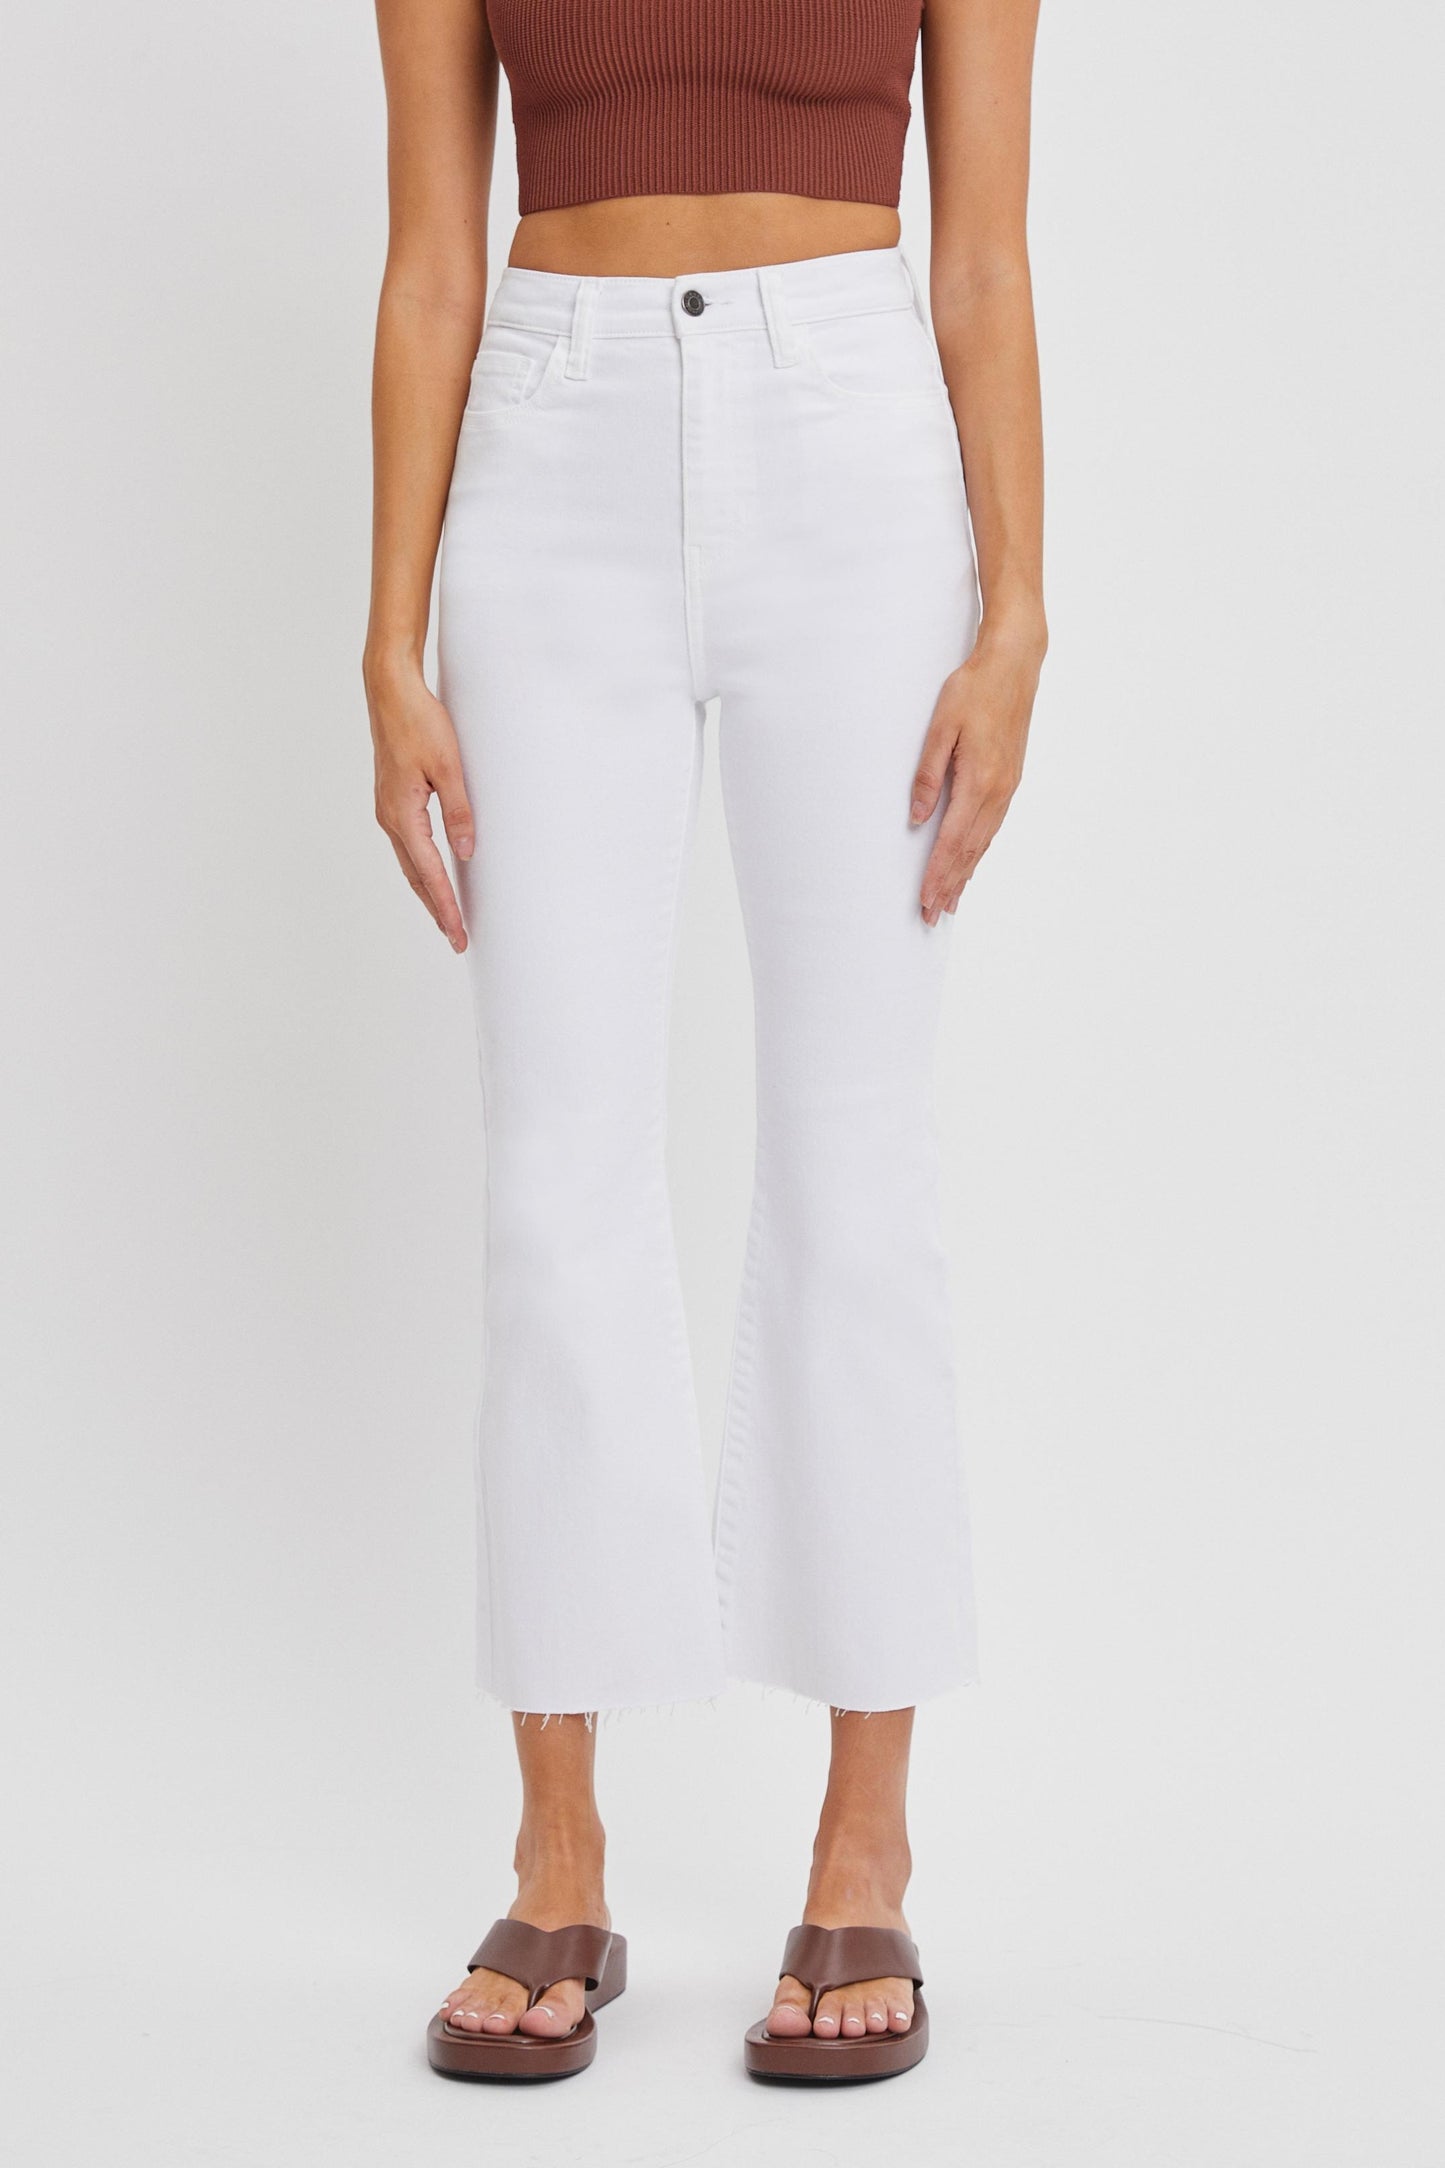 White Cropped Jeans